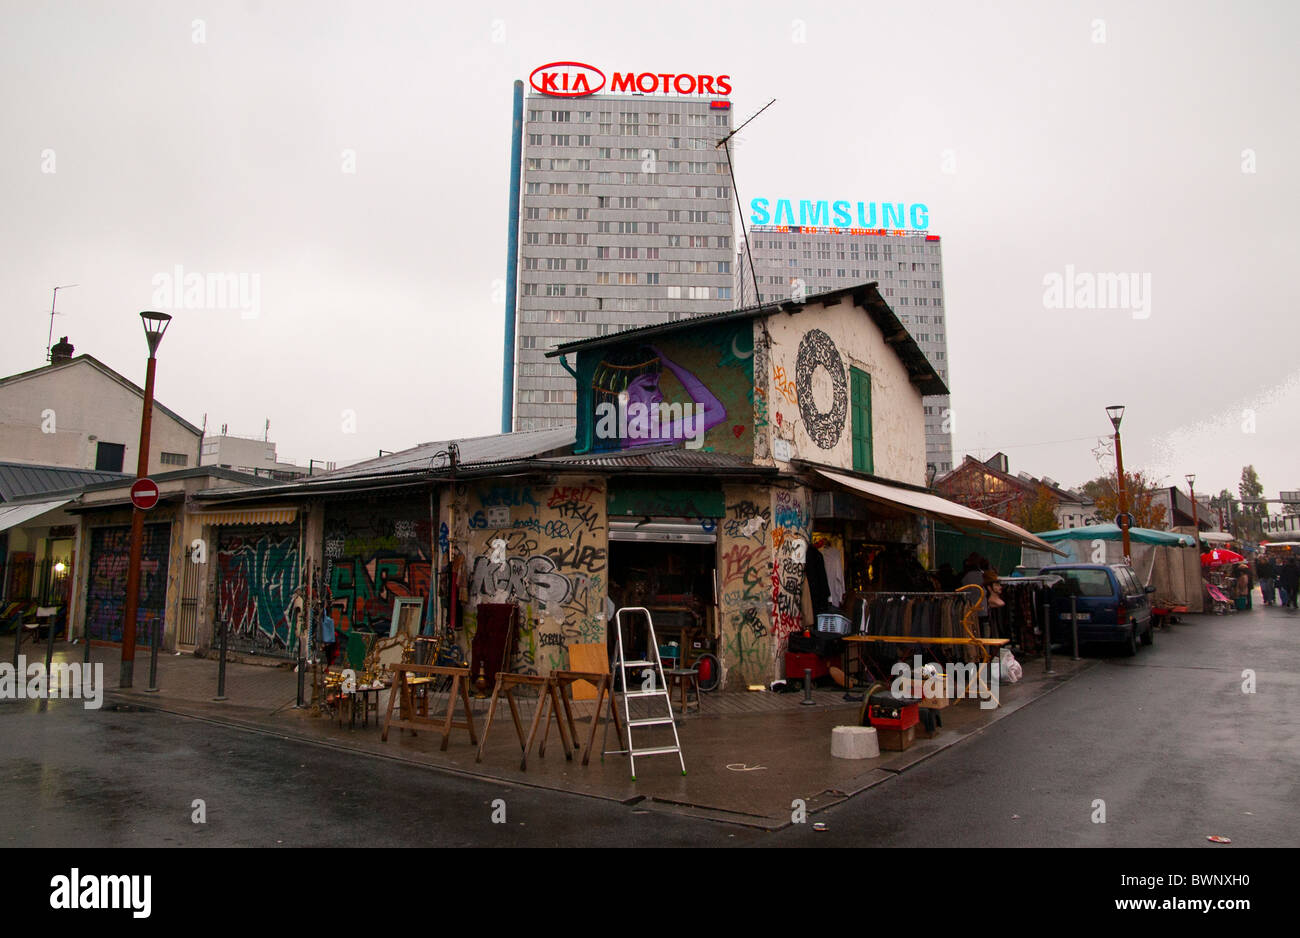 Flee market in Paris, France. KIA Motors and Samsung buildings in the background create an architectural contrast Stock Photo